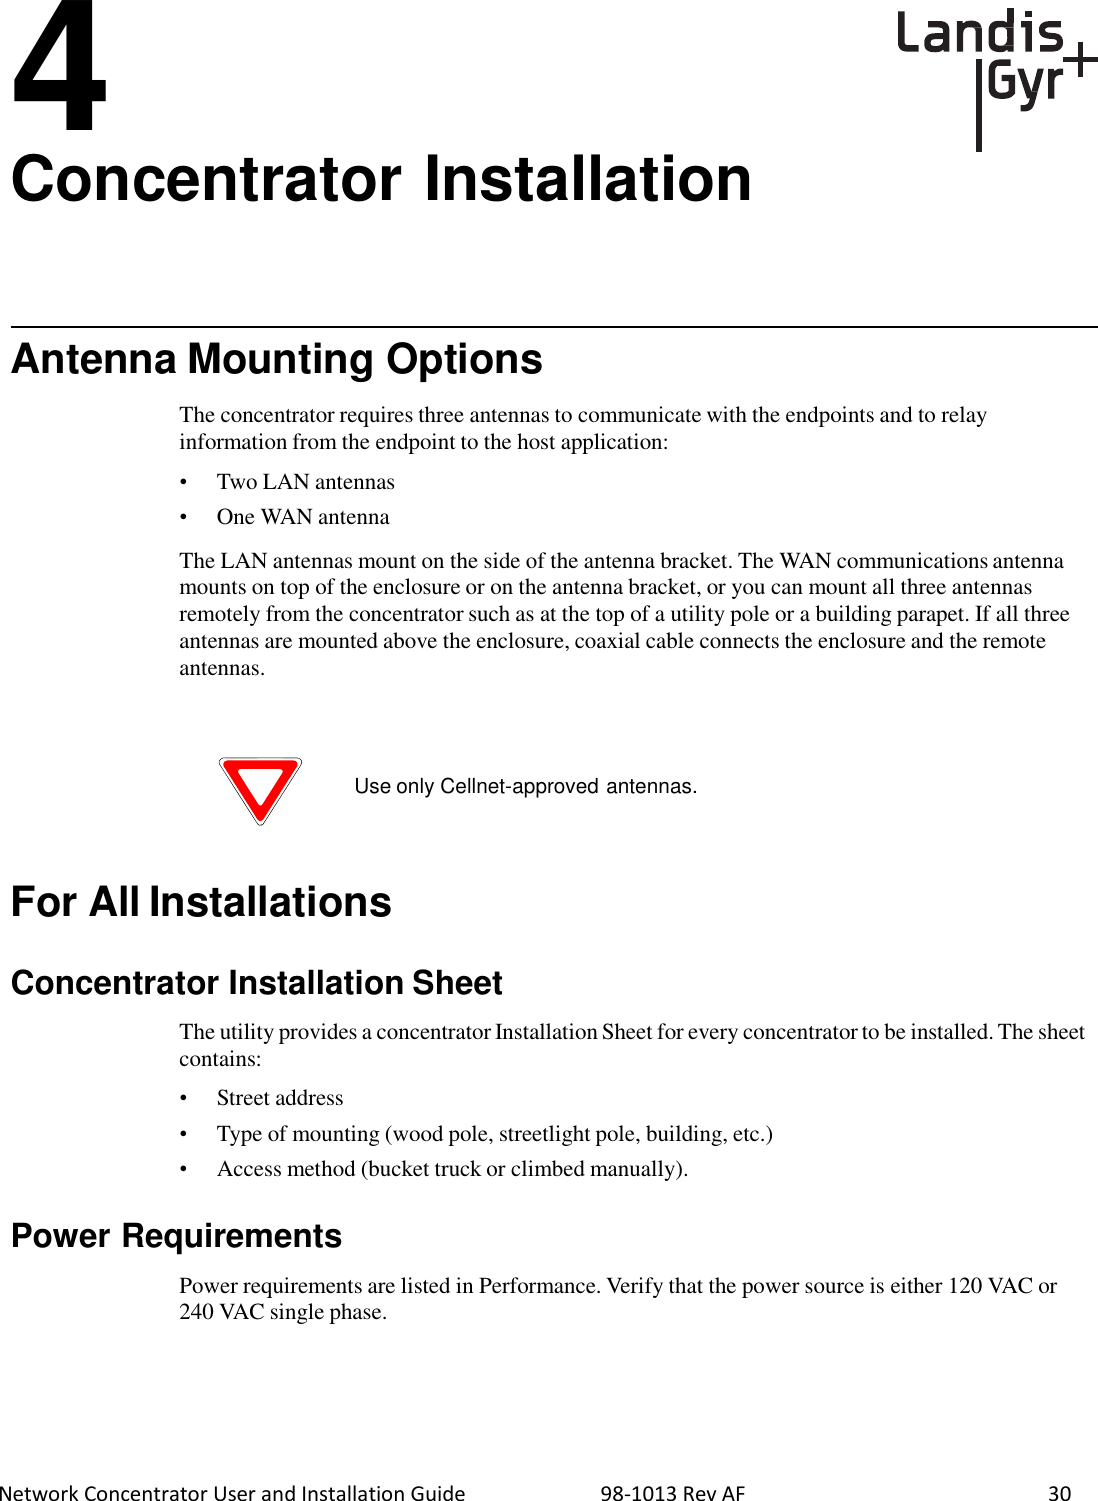  Network Concentrator User and Installation Guide                          98-1013 Rev AF    30 4 Concentrator Installation       Antenna Mounting Options  The concentrator requires three antennas to communicate with the endpoints and to relay information from the endpoint to the host application:  •  Two LAN antennas •  One WAN antenna  The LAN antennas mount on the side of the antenna bracket. The WAN communications antenna mounts on top of the enclosure or on the antenna bracket, or you can mount all three antennas remotely from the concentrator such as at the top of a utility pole or a building parapet. If all three antennas are mounted above the enclosure, coaxial cable connects the enclosure and the remote antennas.     Use only Cellnet-approved antennas.     For All Installations   Concentrator Installation Sheet  The utility provides a concentrator Installation Sheet for every concentrator to be installed. The sheet contains:  •  Street address •  Type of mounting (wood pole, streetlight pole, building, etc.) • Access method (bucket truck or climbed manually).   Power Requirements  Power requirements are listed in Performance. Verify that the power source is either 120 VAC or 240 VAC single phase. 